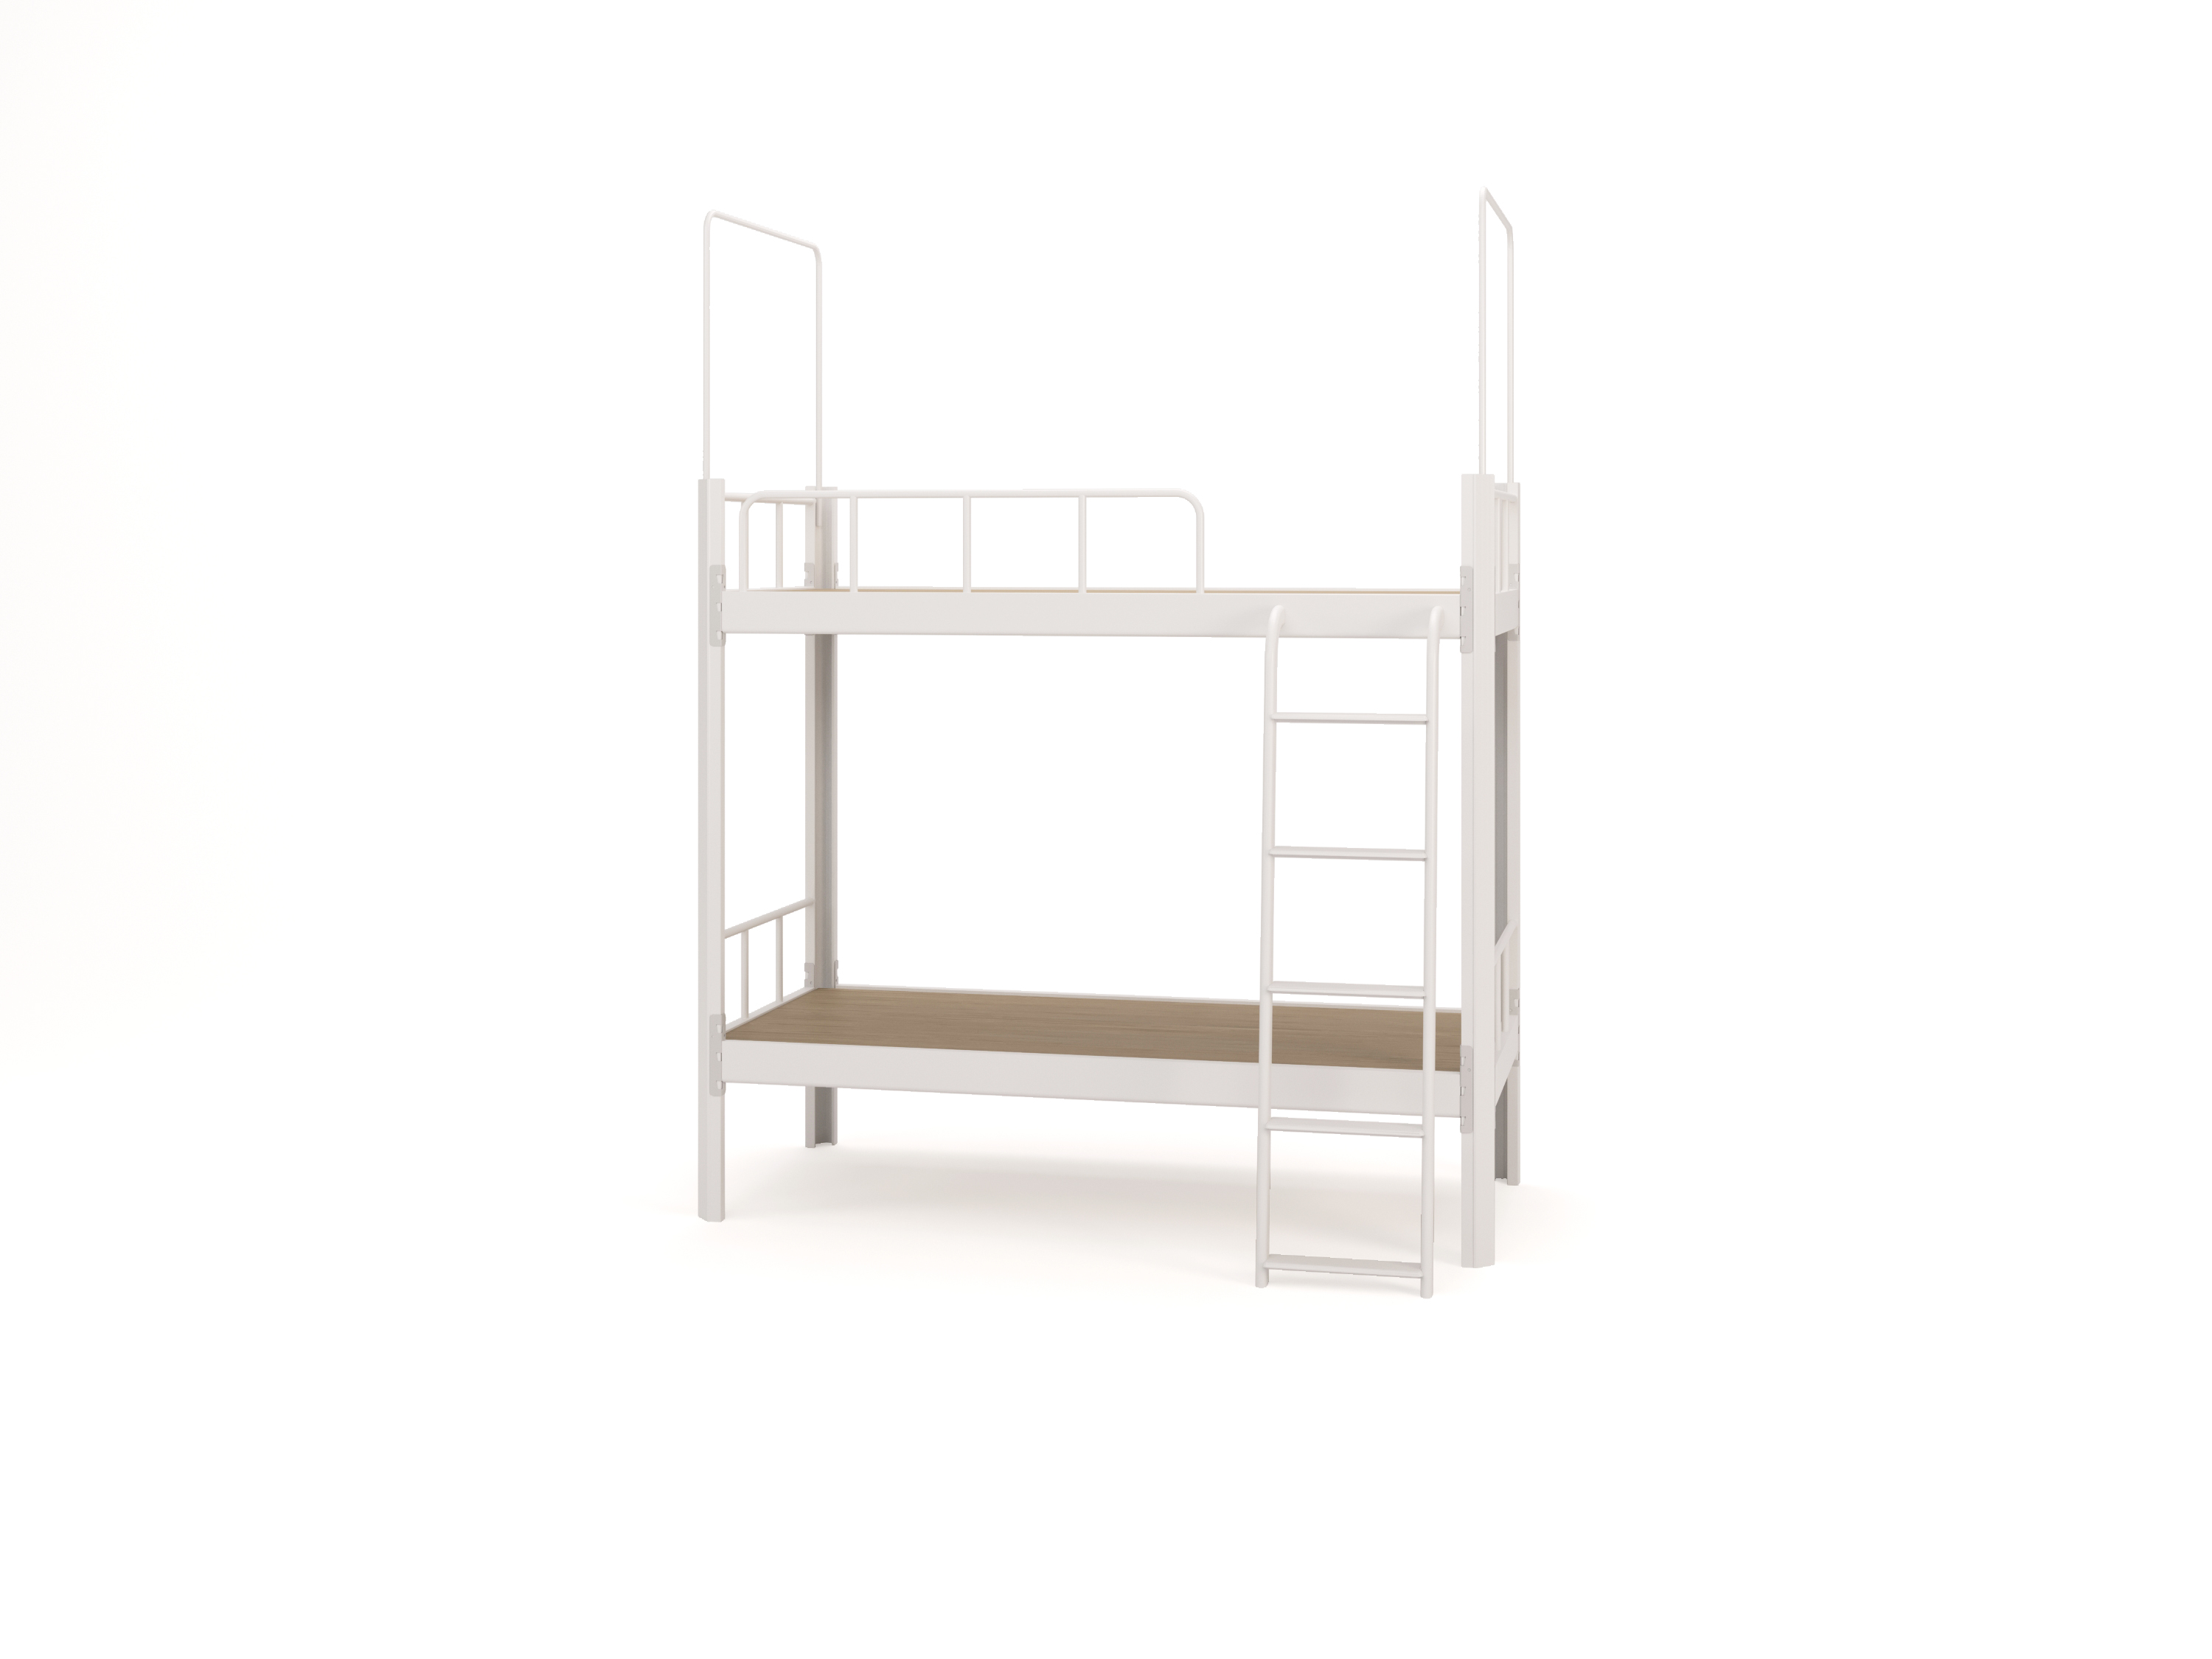 Contemporary Metal Frame Modern Futon Bunk Bed Frame with Safety Rail Built-in Ladder for hospital